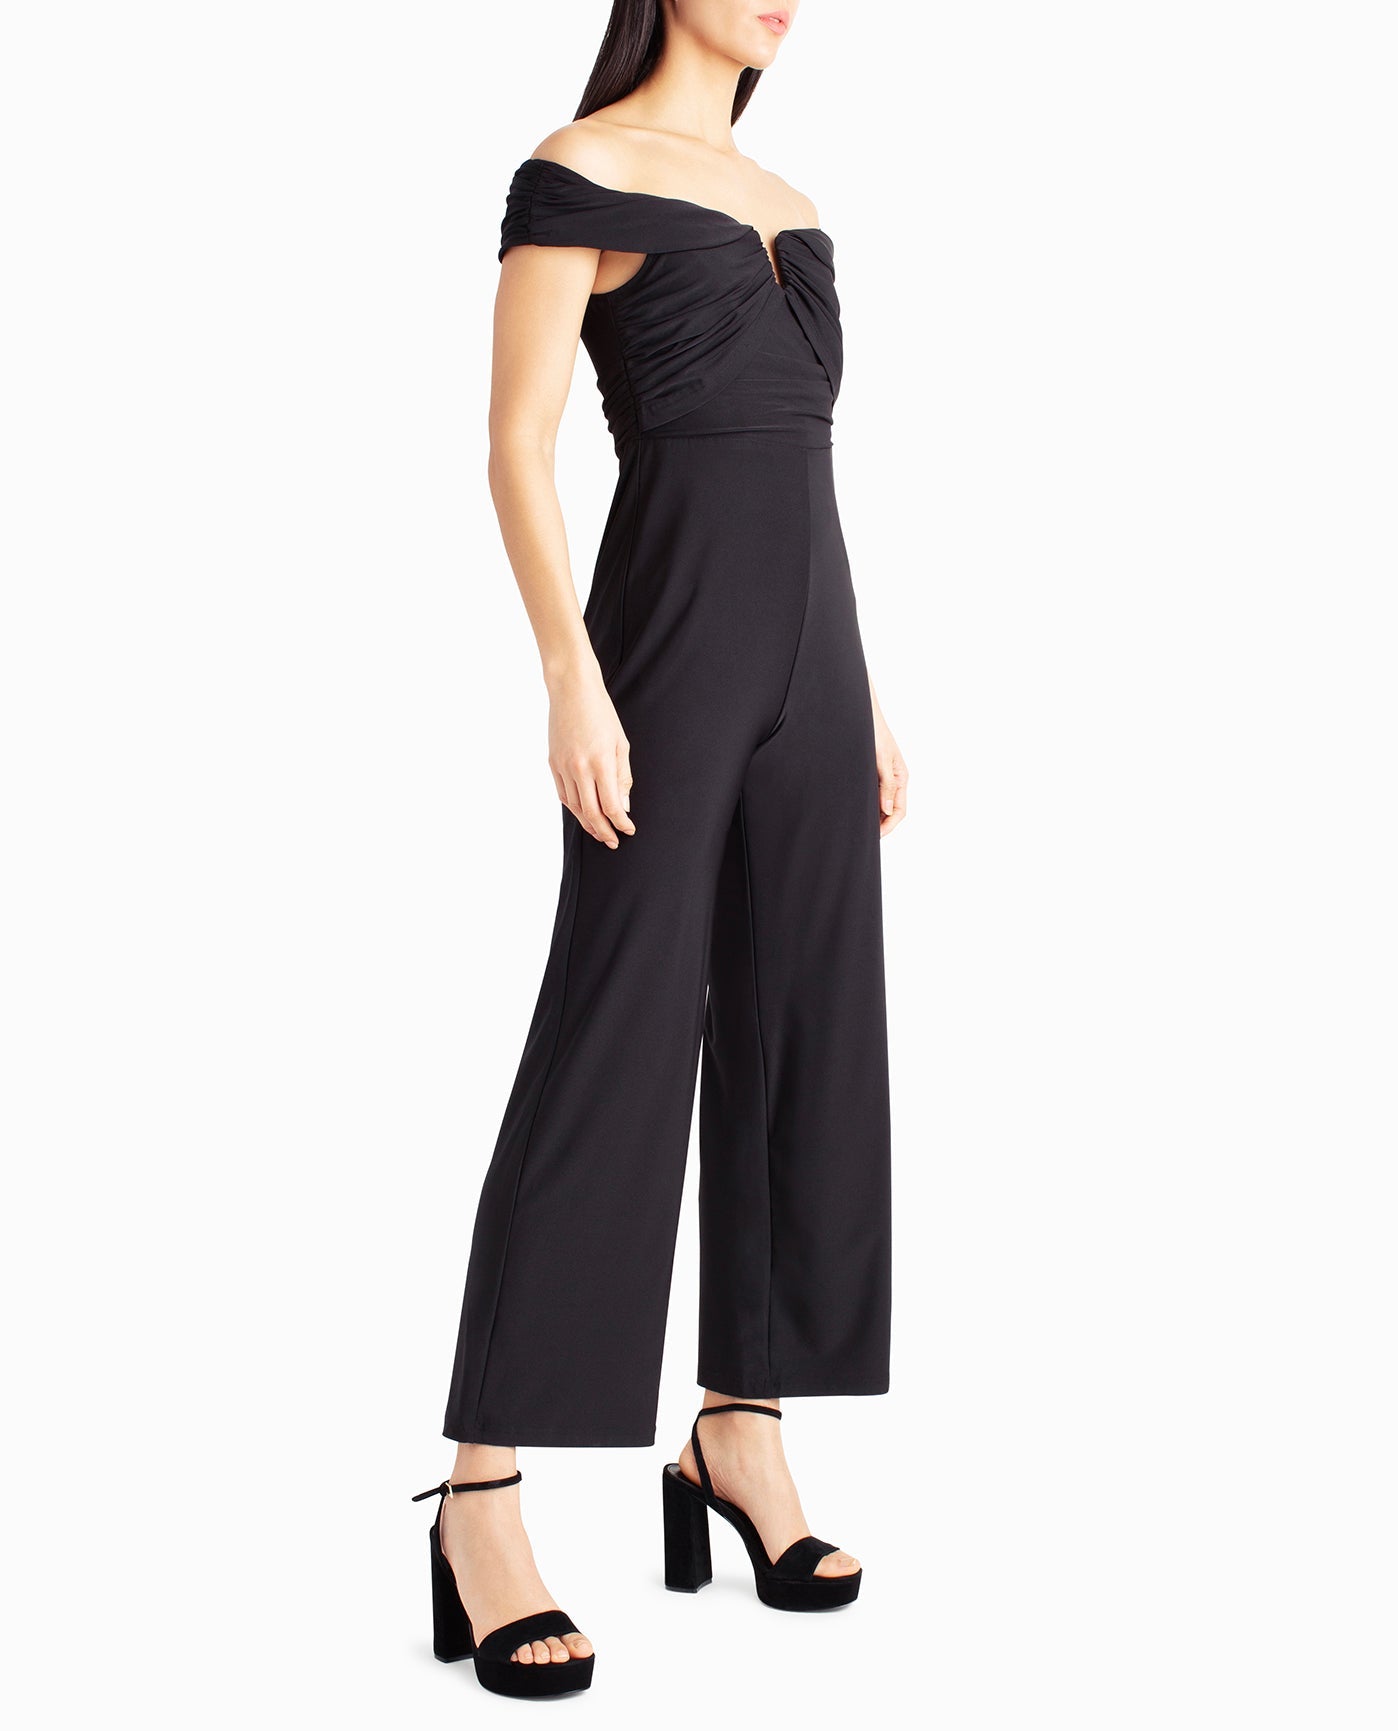 WHITNEY OFF-THE-SHOULDER JUMPSUIT